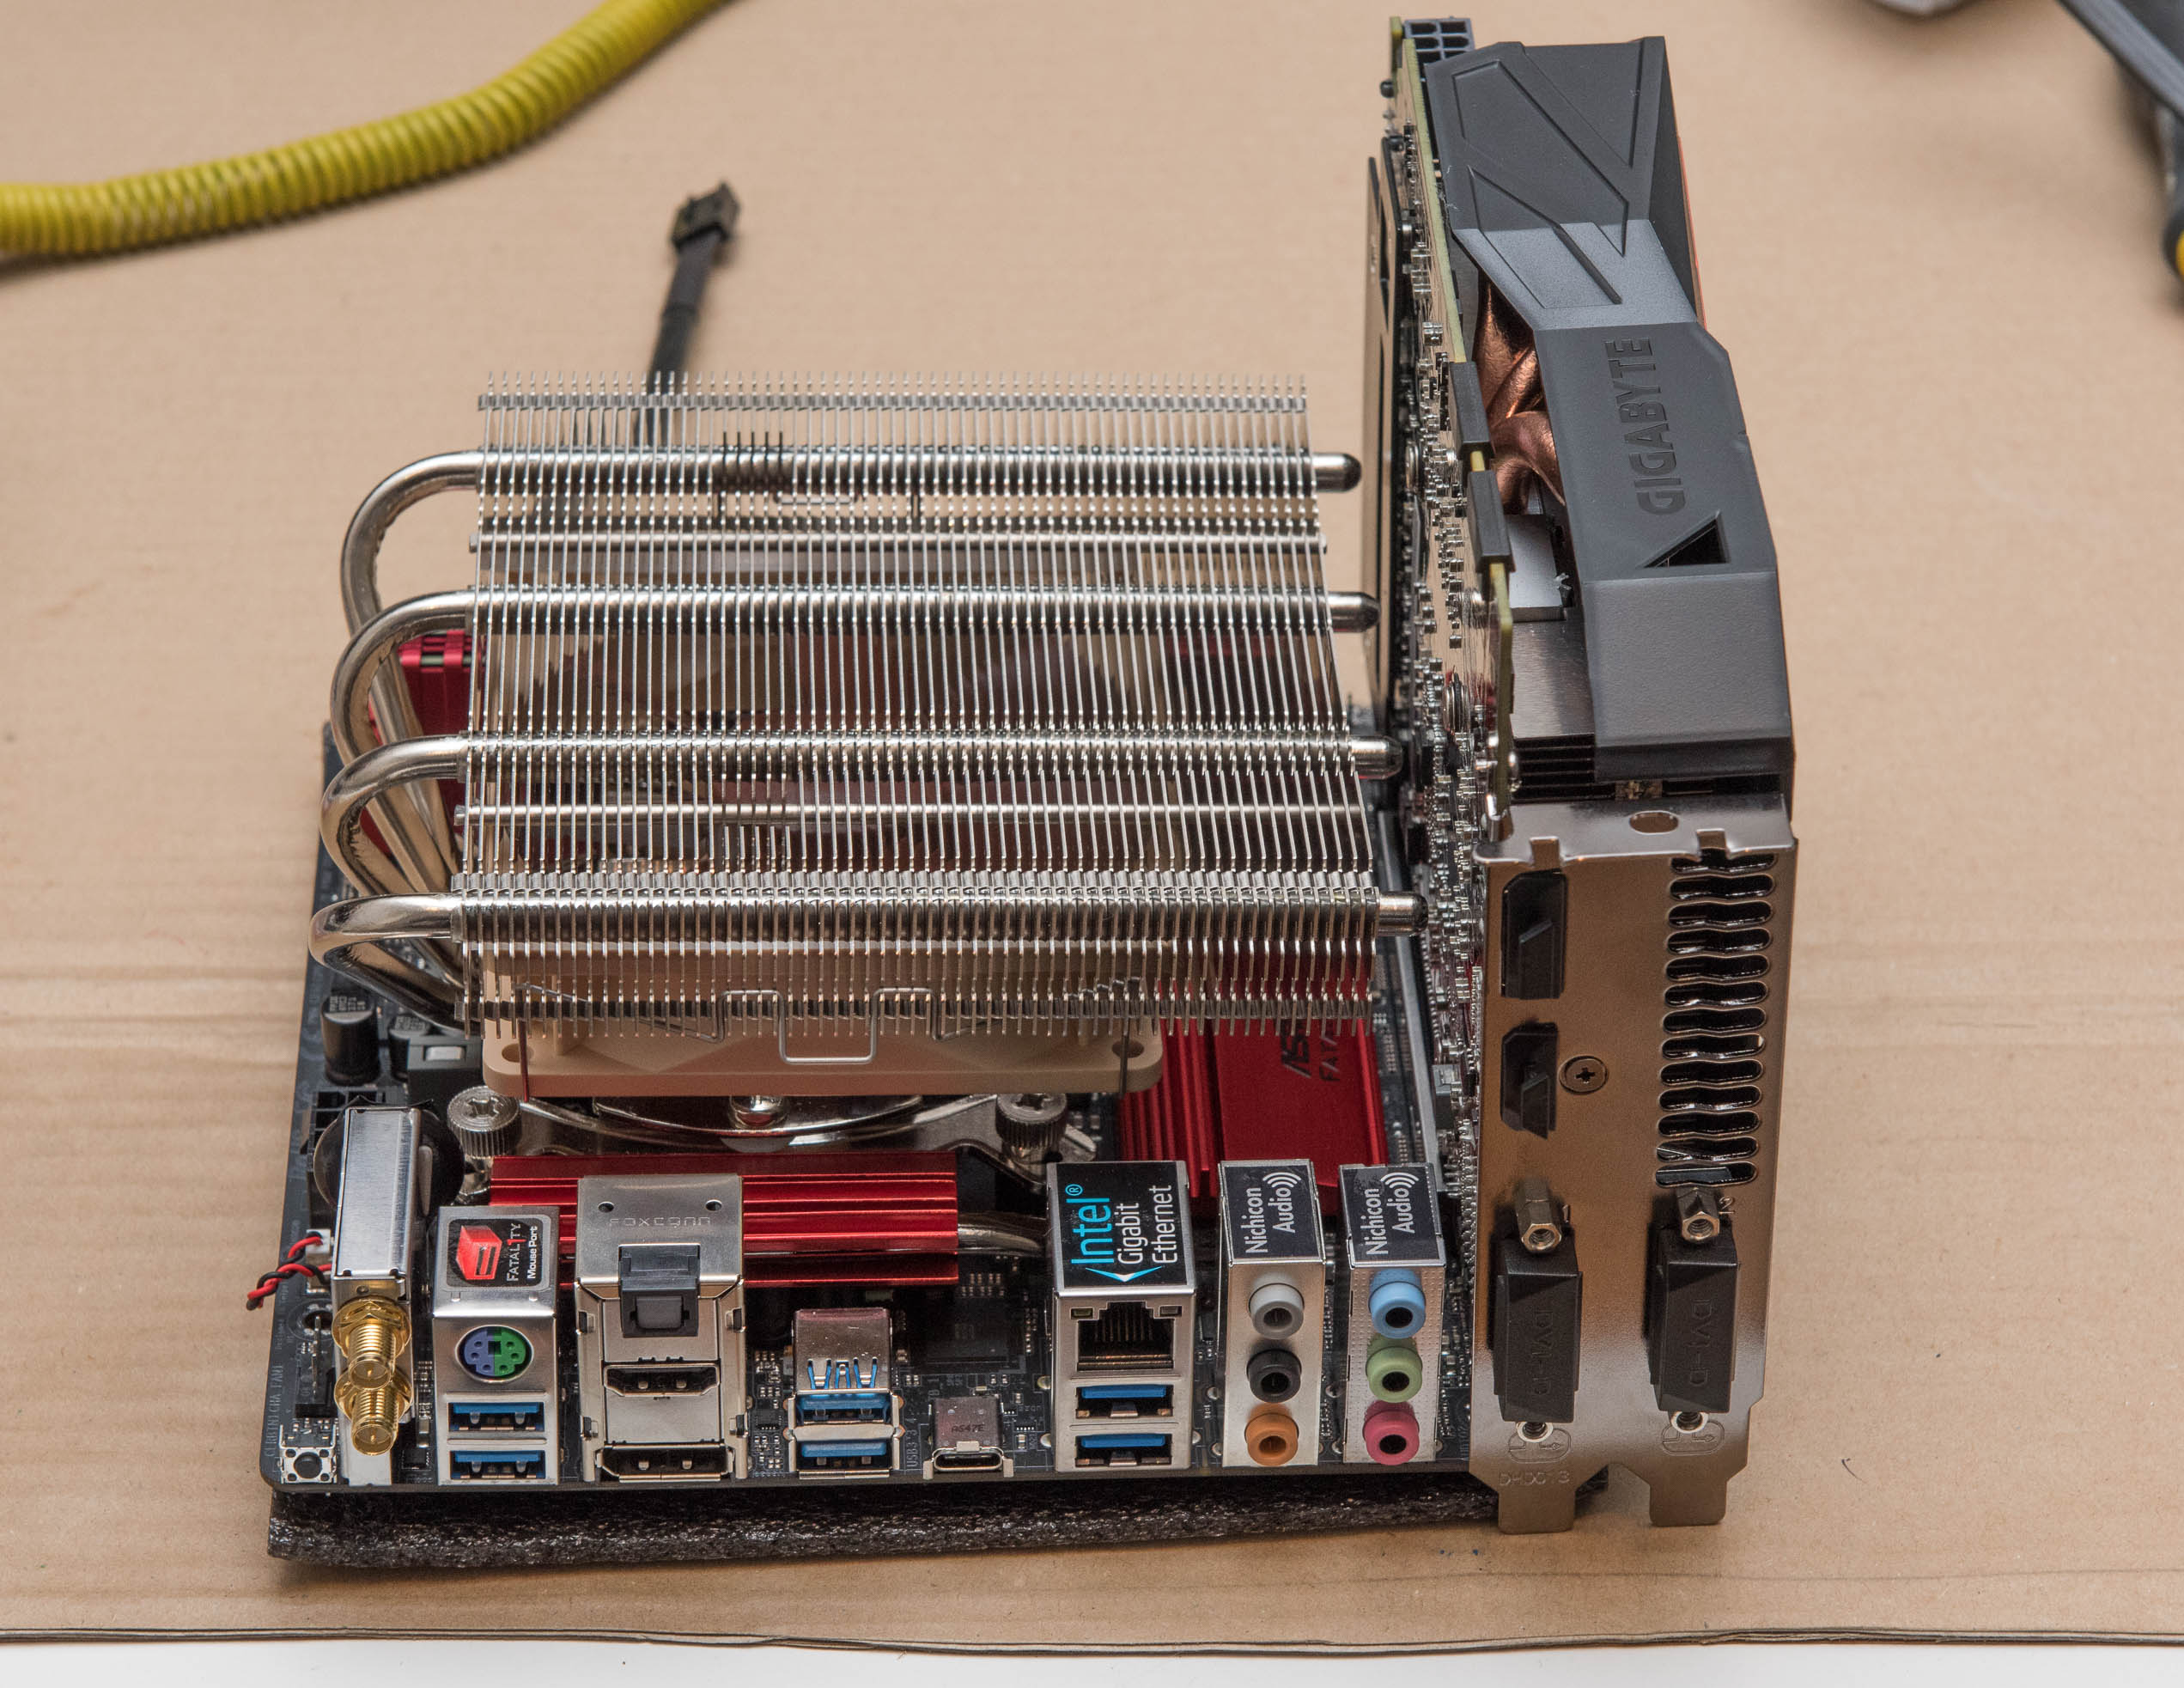 Dry fit of the ASRock motherboard, Noctua NH-L12 cooler and Gigabyte GPU